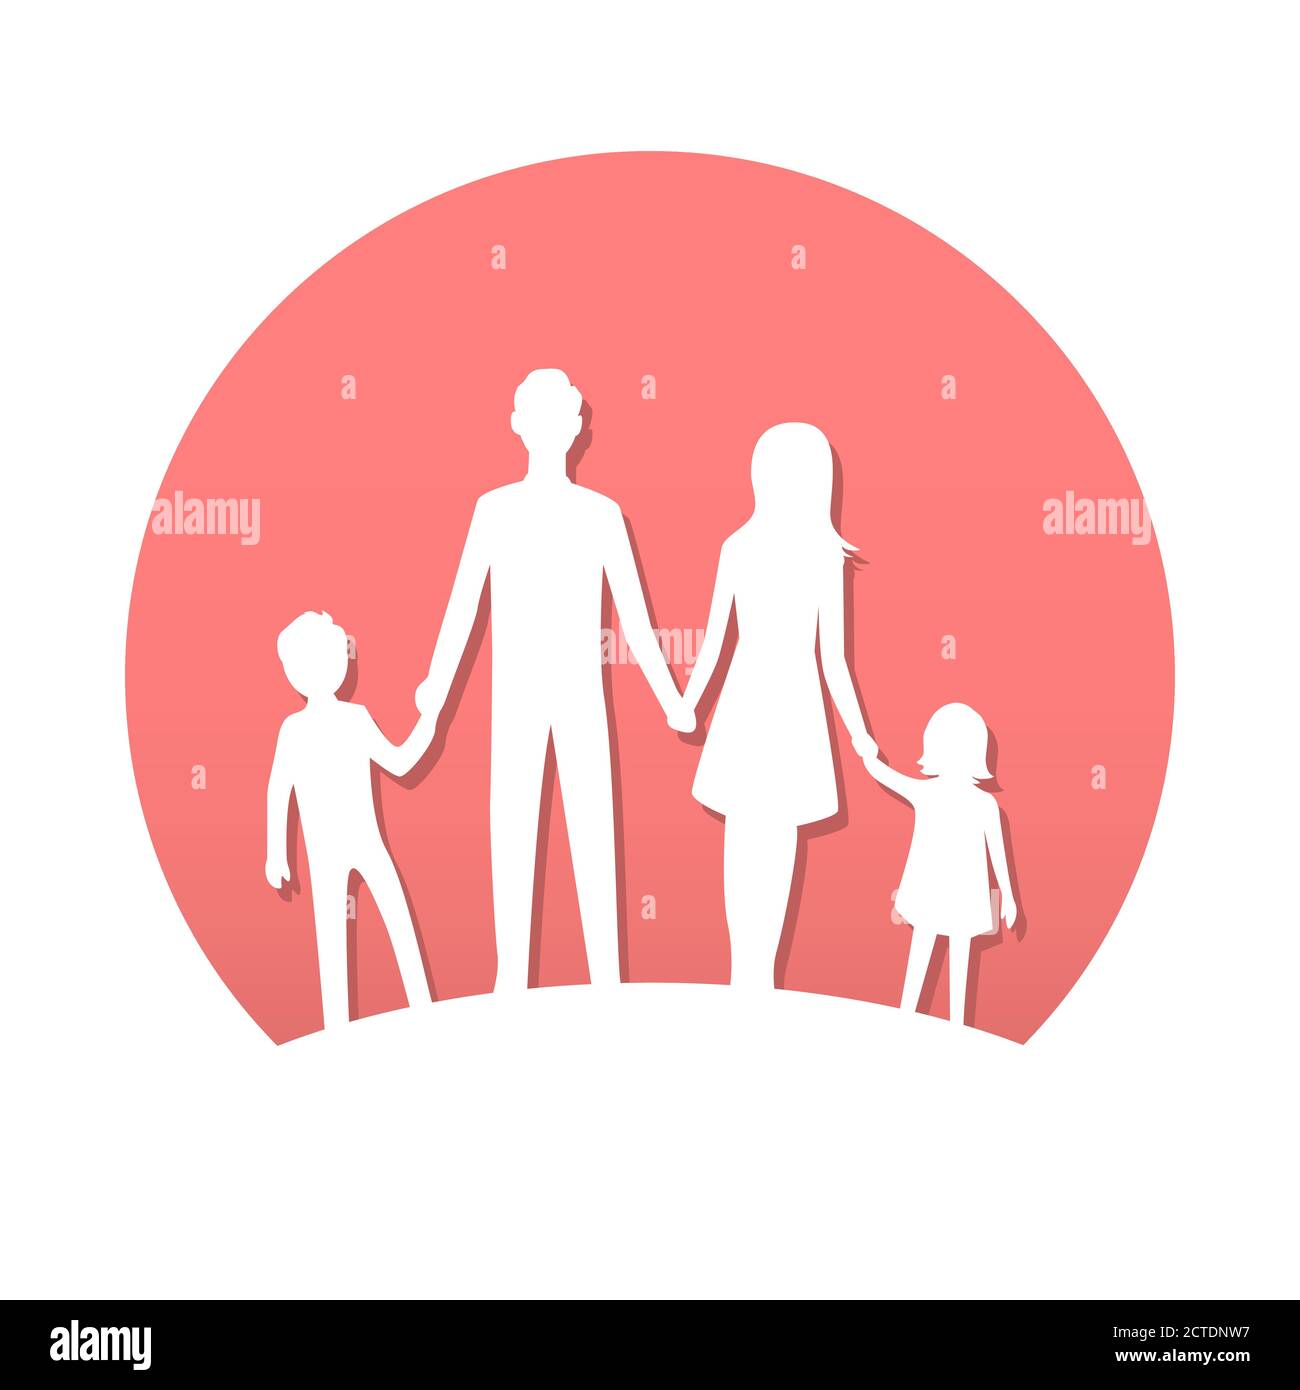 Silhouette of a friendly family. Stock Vector